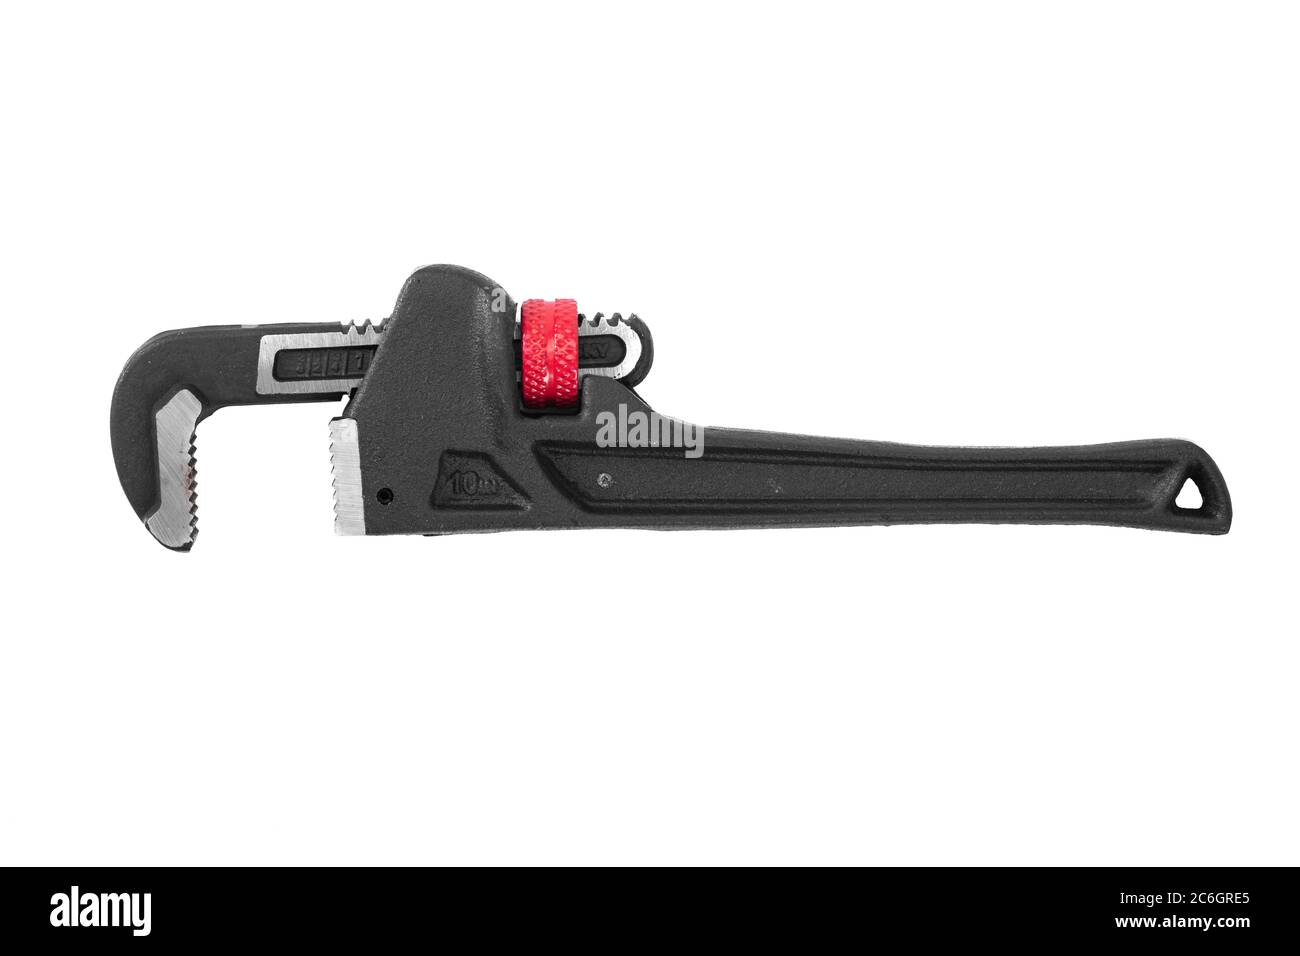 Adjustable Pipe Wrench Stock Photo